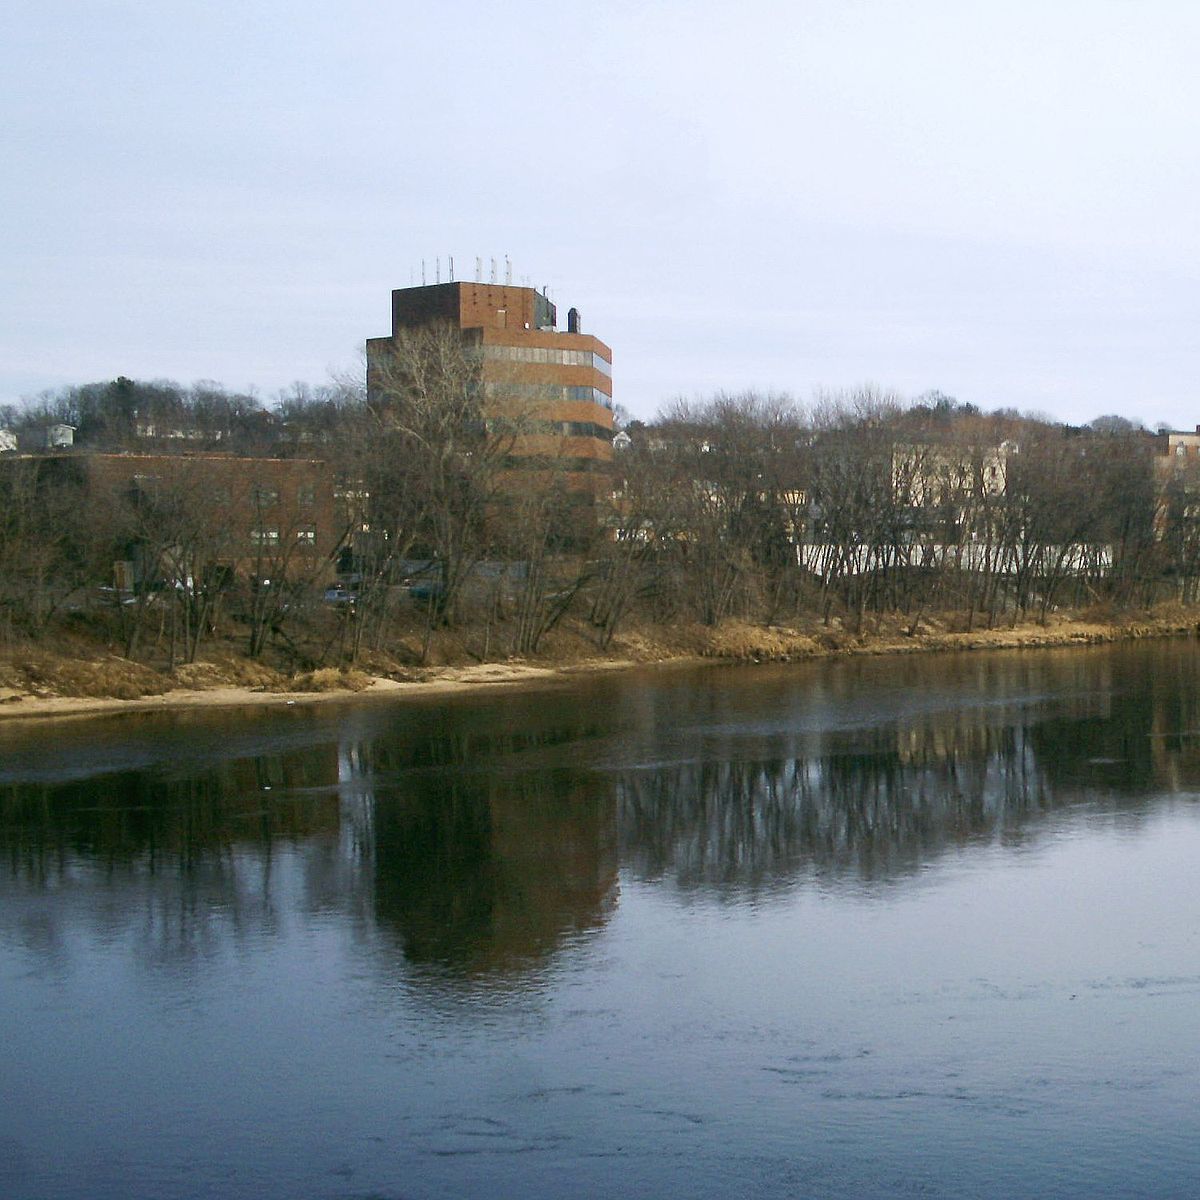 File:Eau Claire - Chippewa River looking south east.jpg - Wikipedia